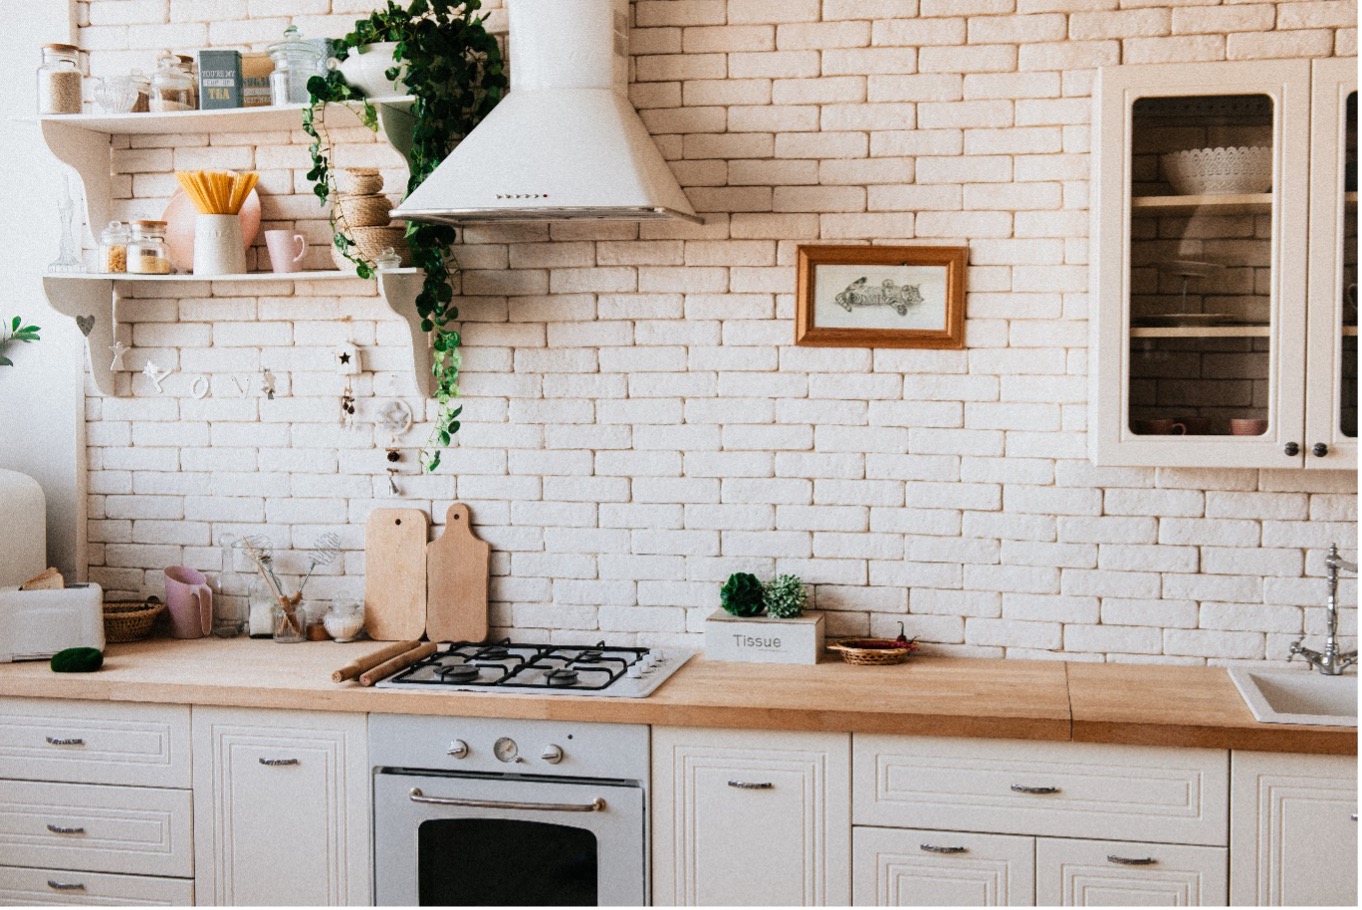 White brick kitchen wall with basic clean wooden countertops with hanging art, shelving and houseplants personalizing the kitchen